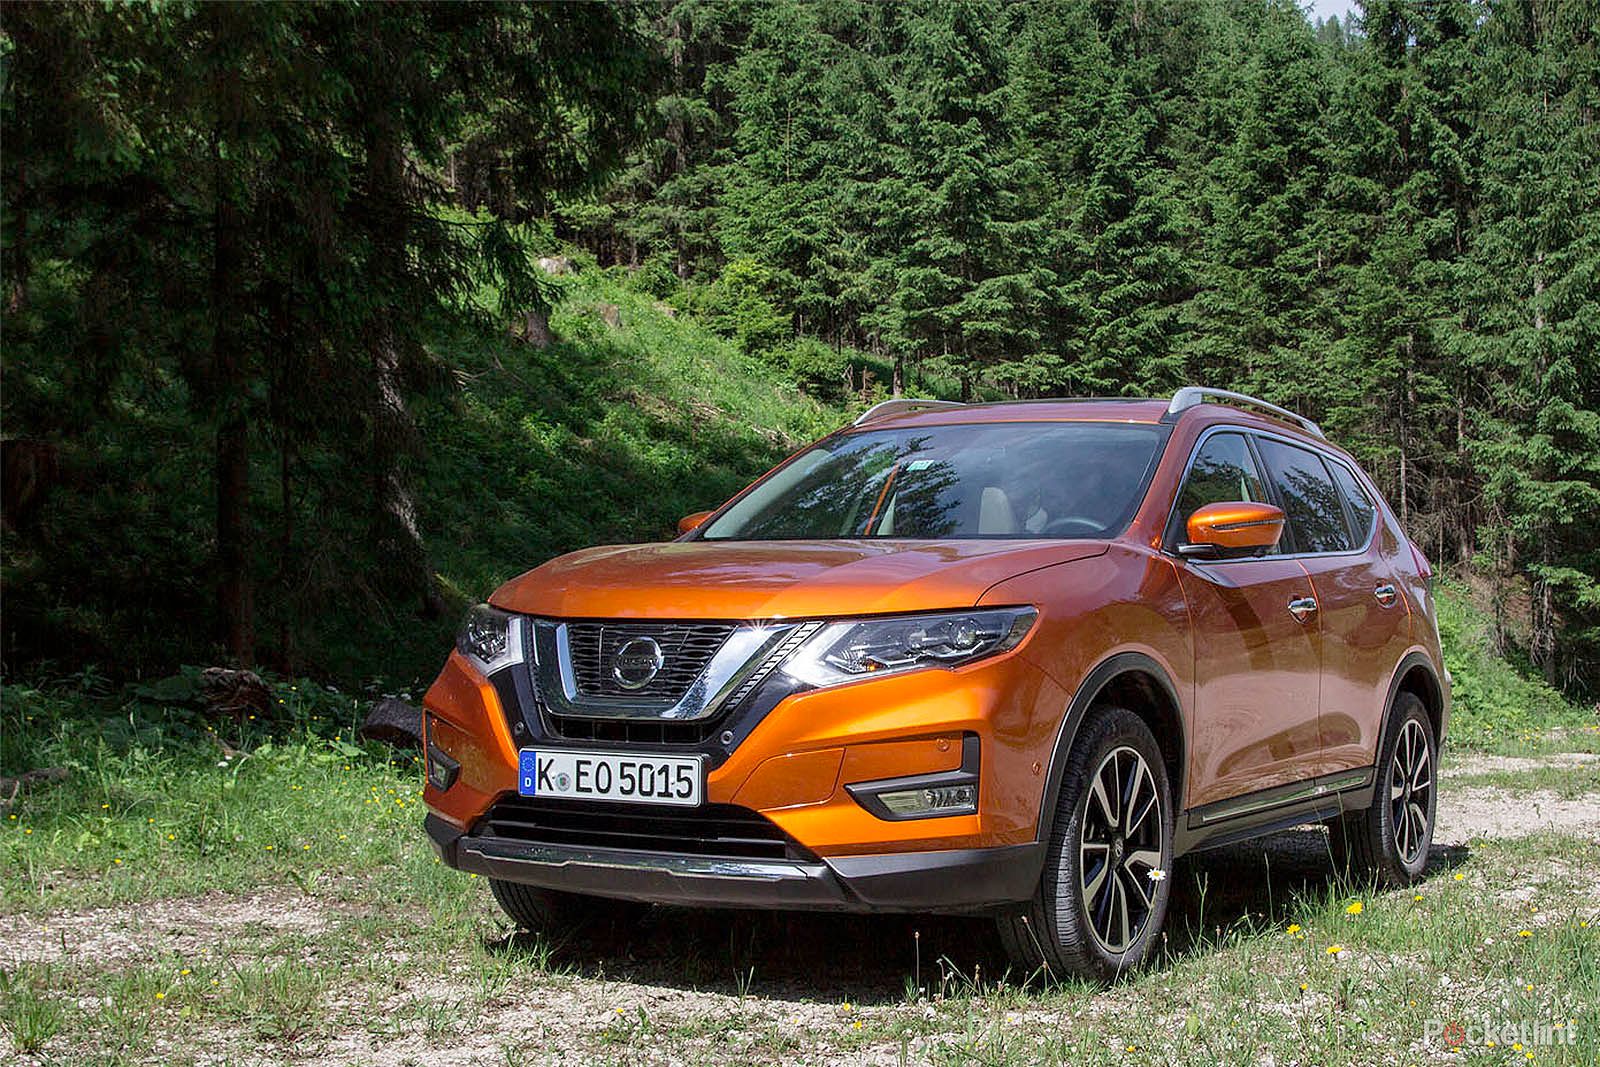 Nissan X-Trail (2017) review: Great value SUV gets premium updates